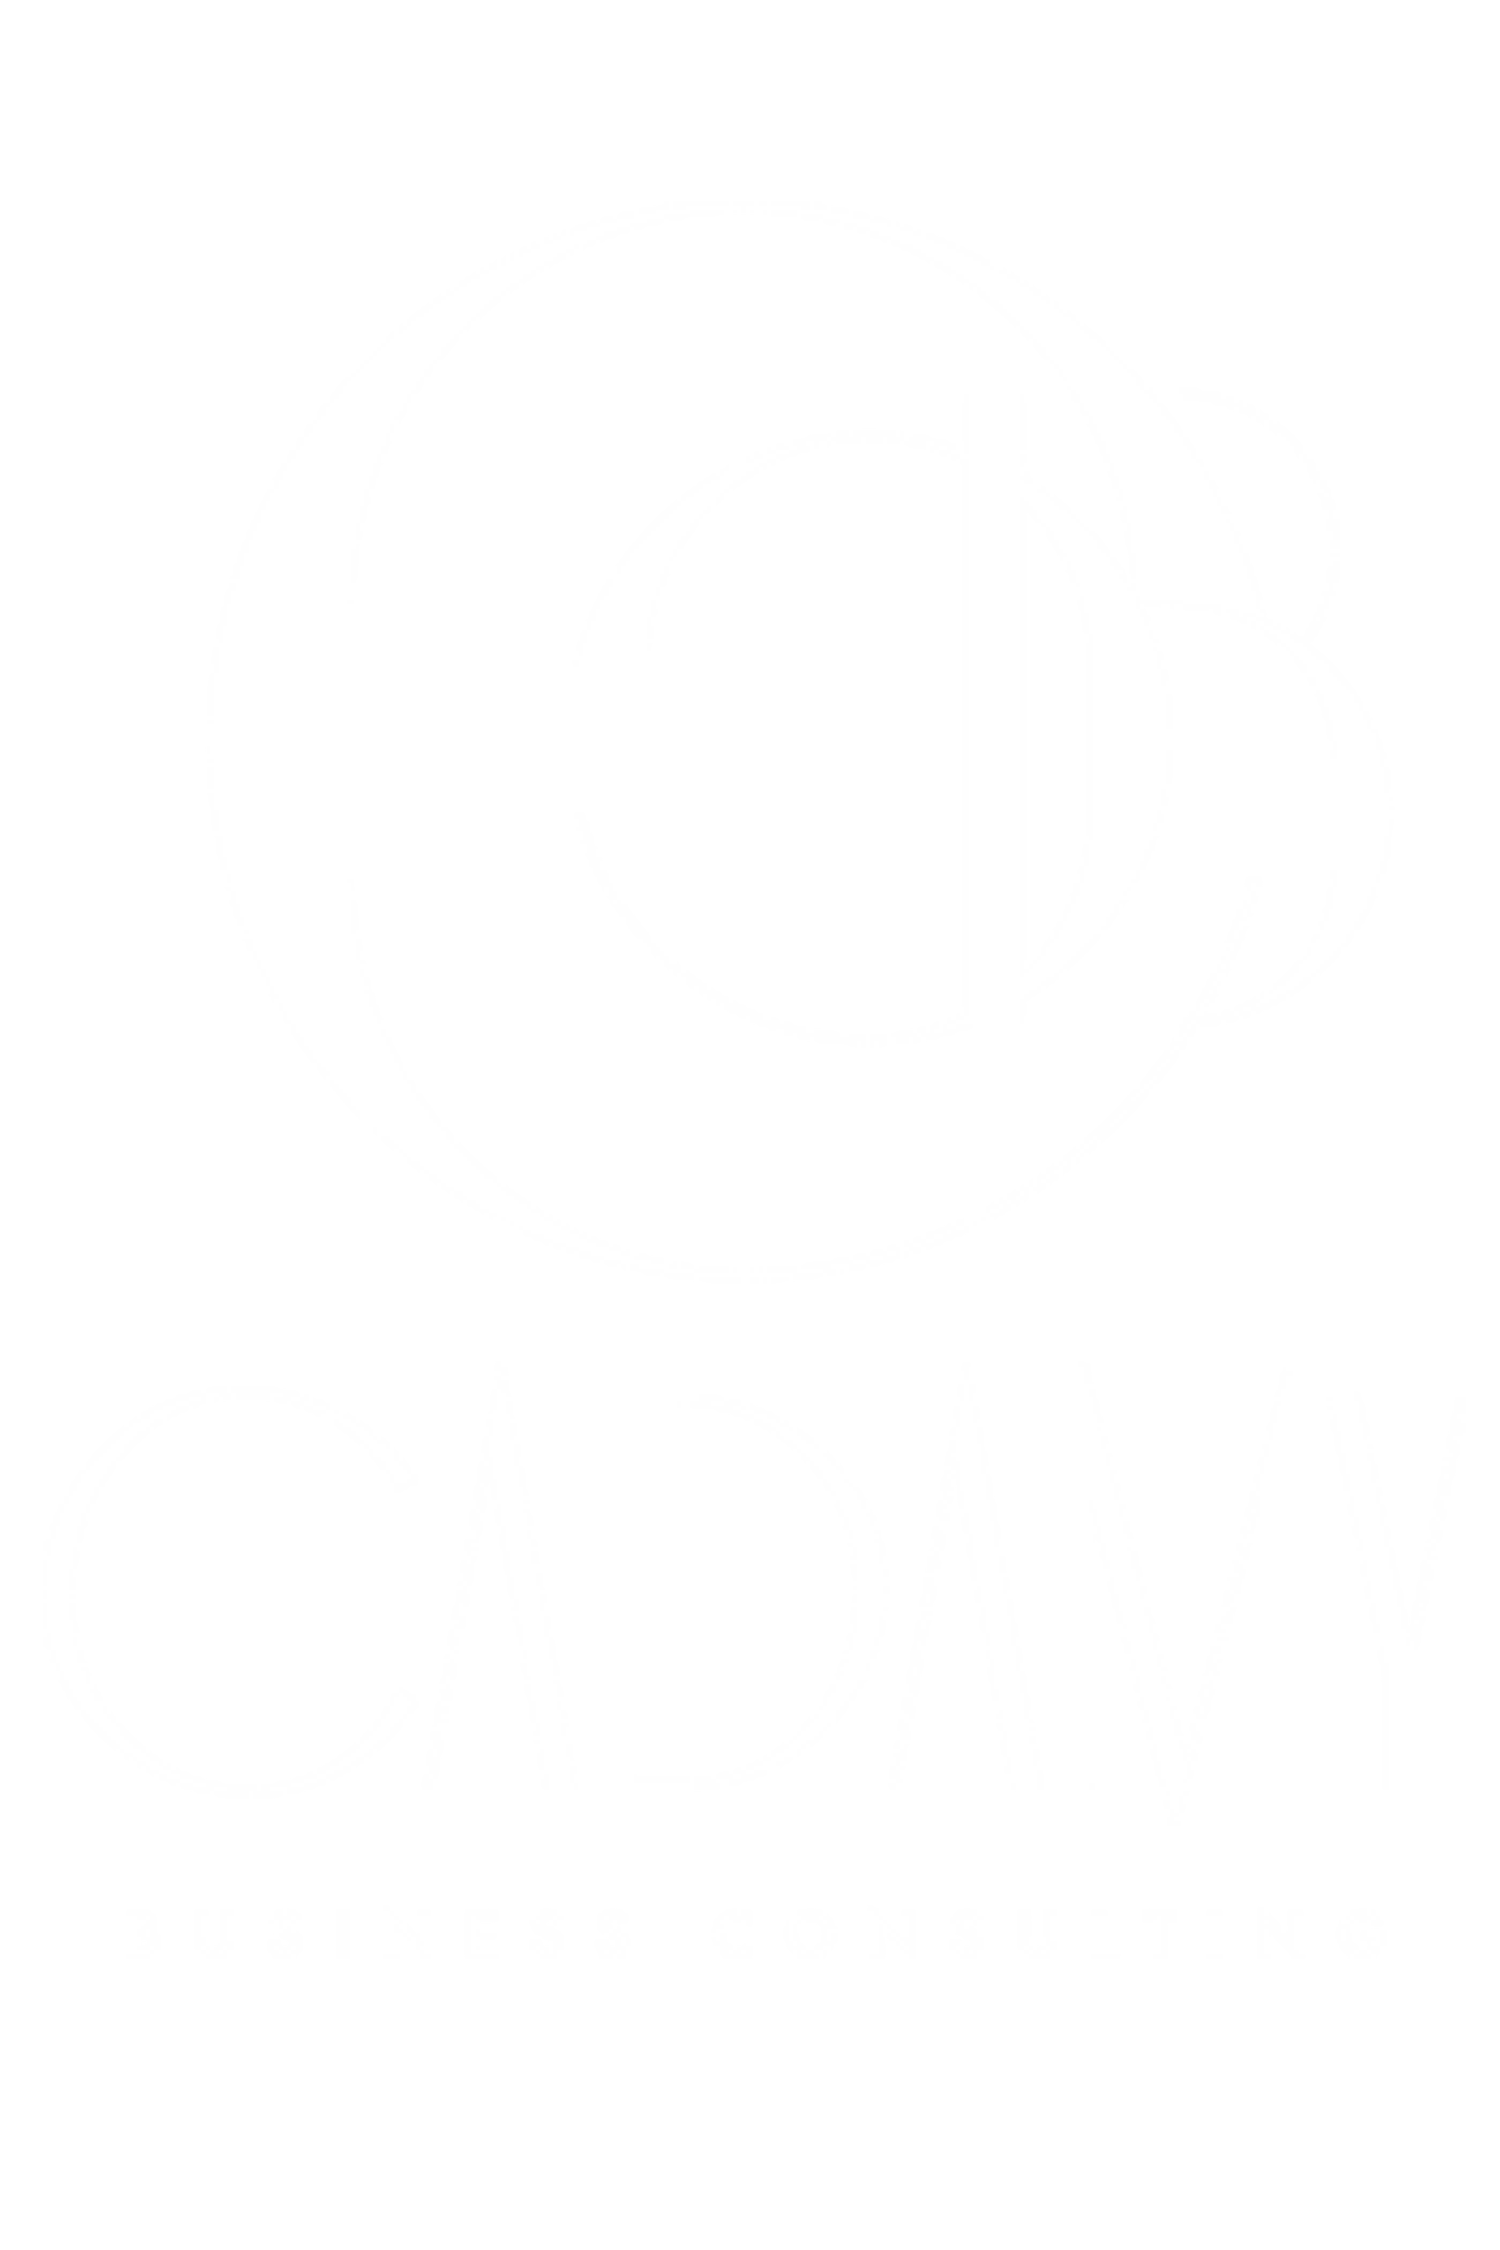 Cadamy Business Consulting